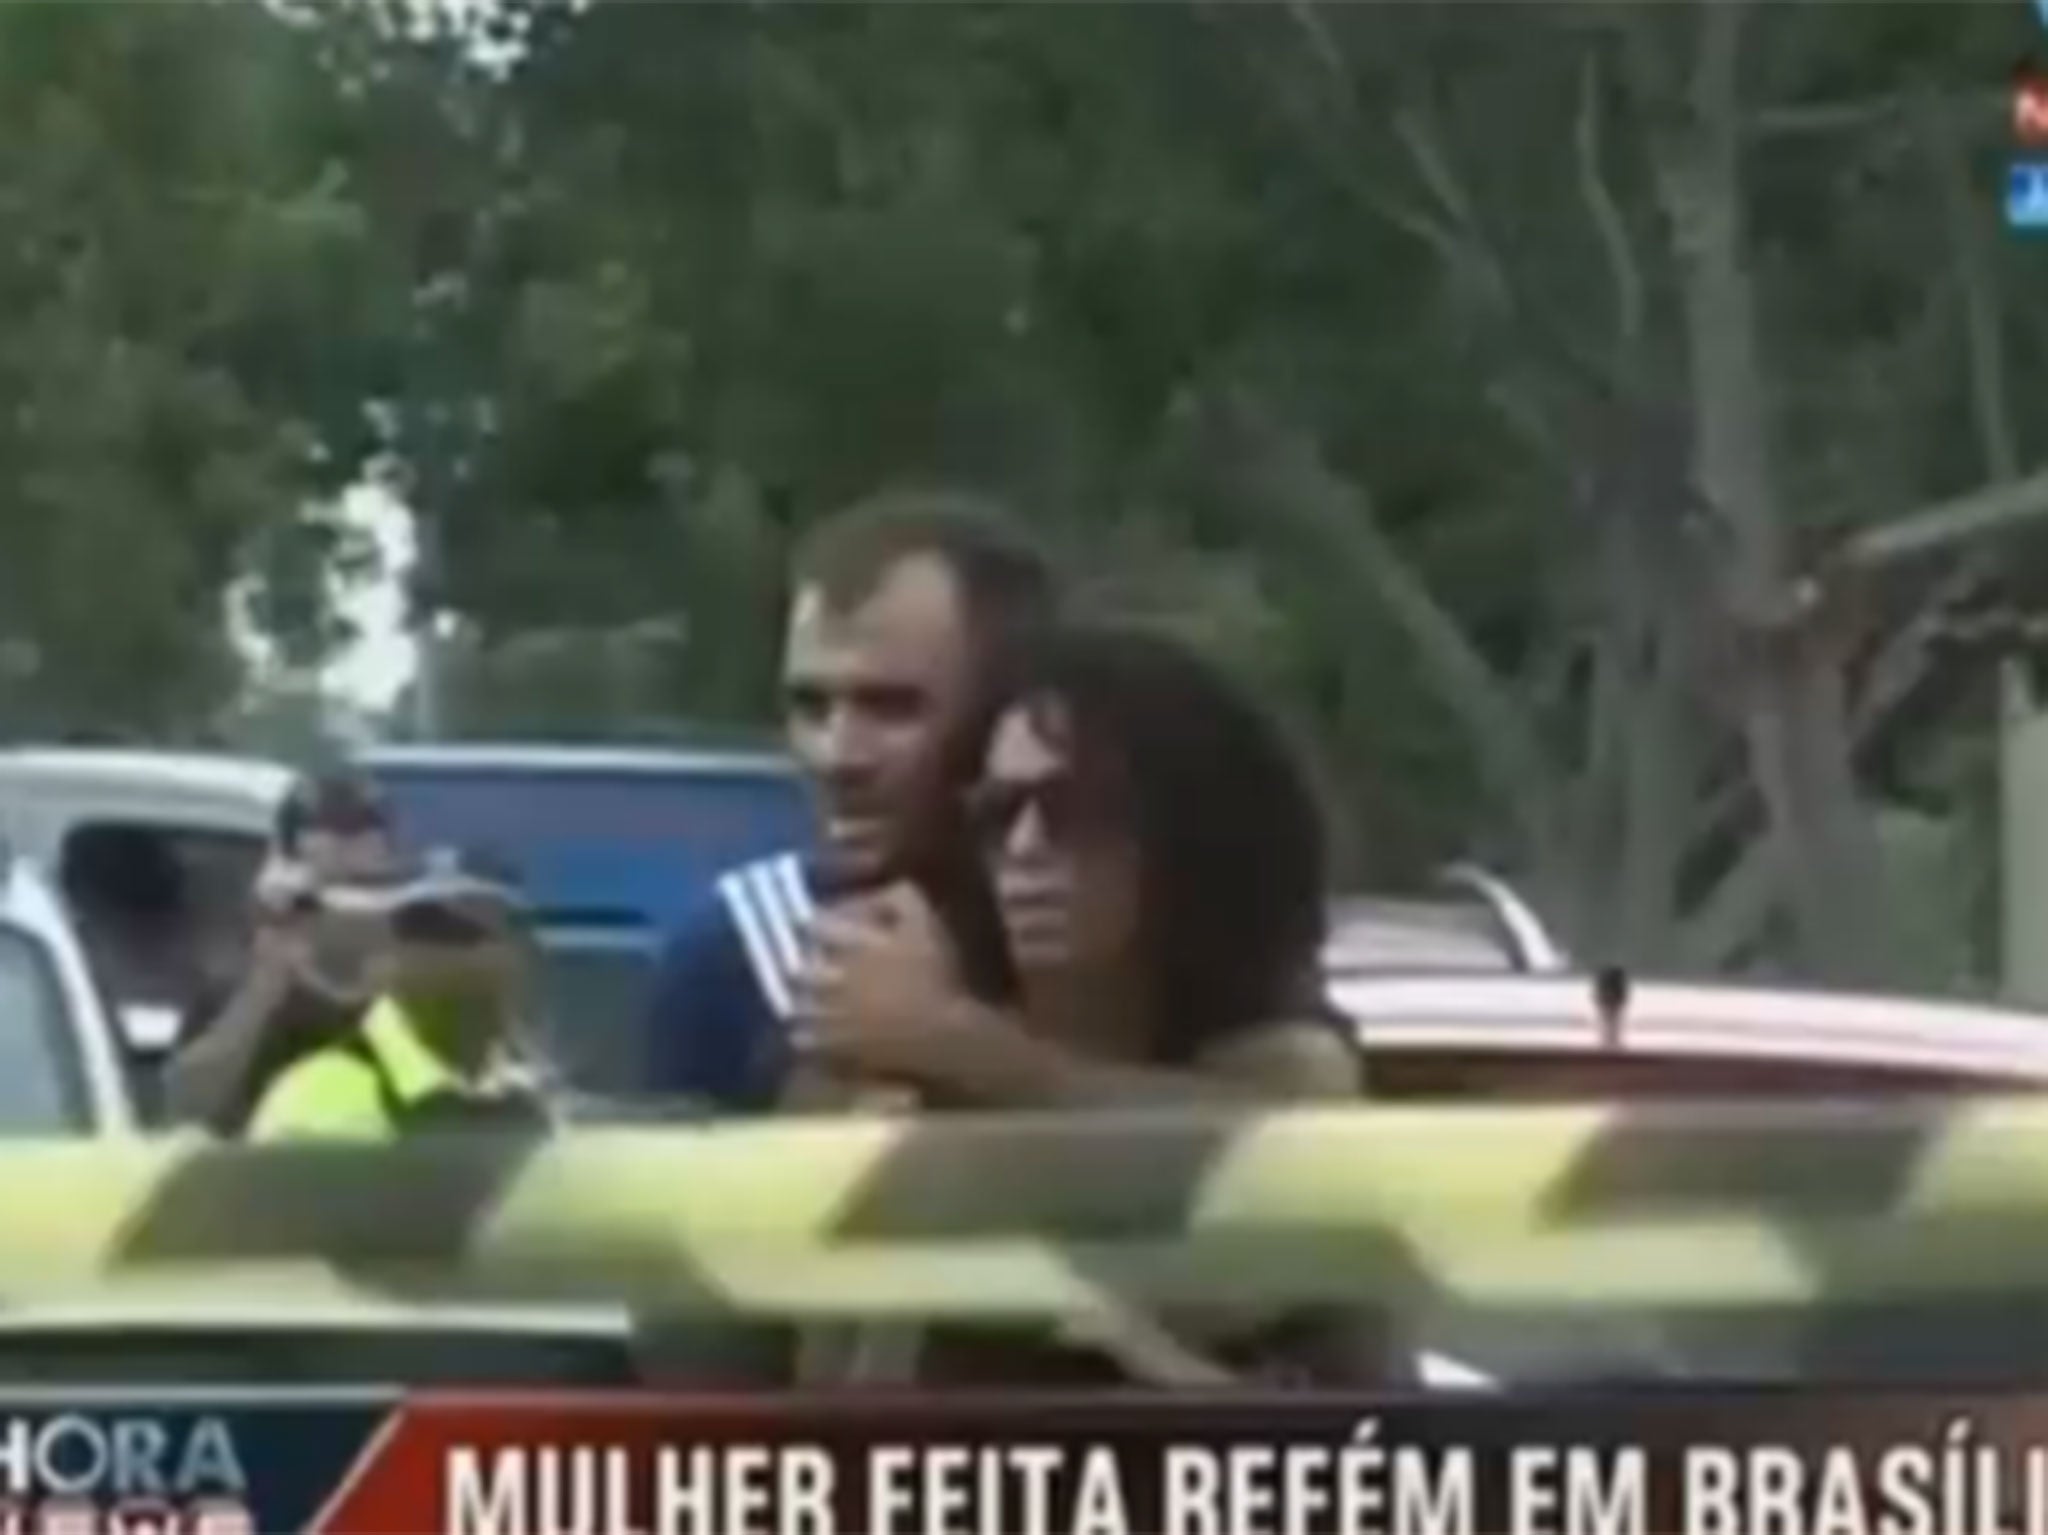 Brazilian police saved a woman in dramatic fashion after she was held hostage with two knives in the capital city of Brasilia.